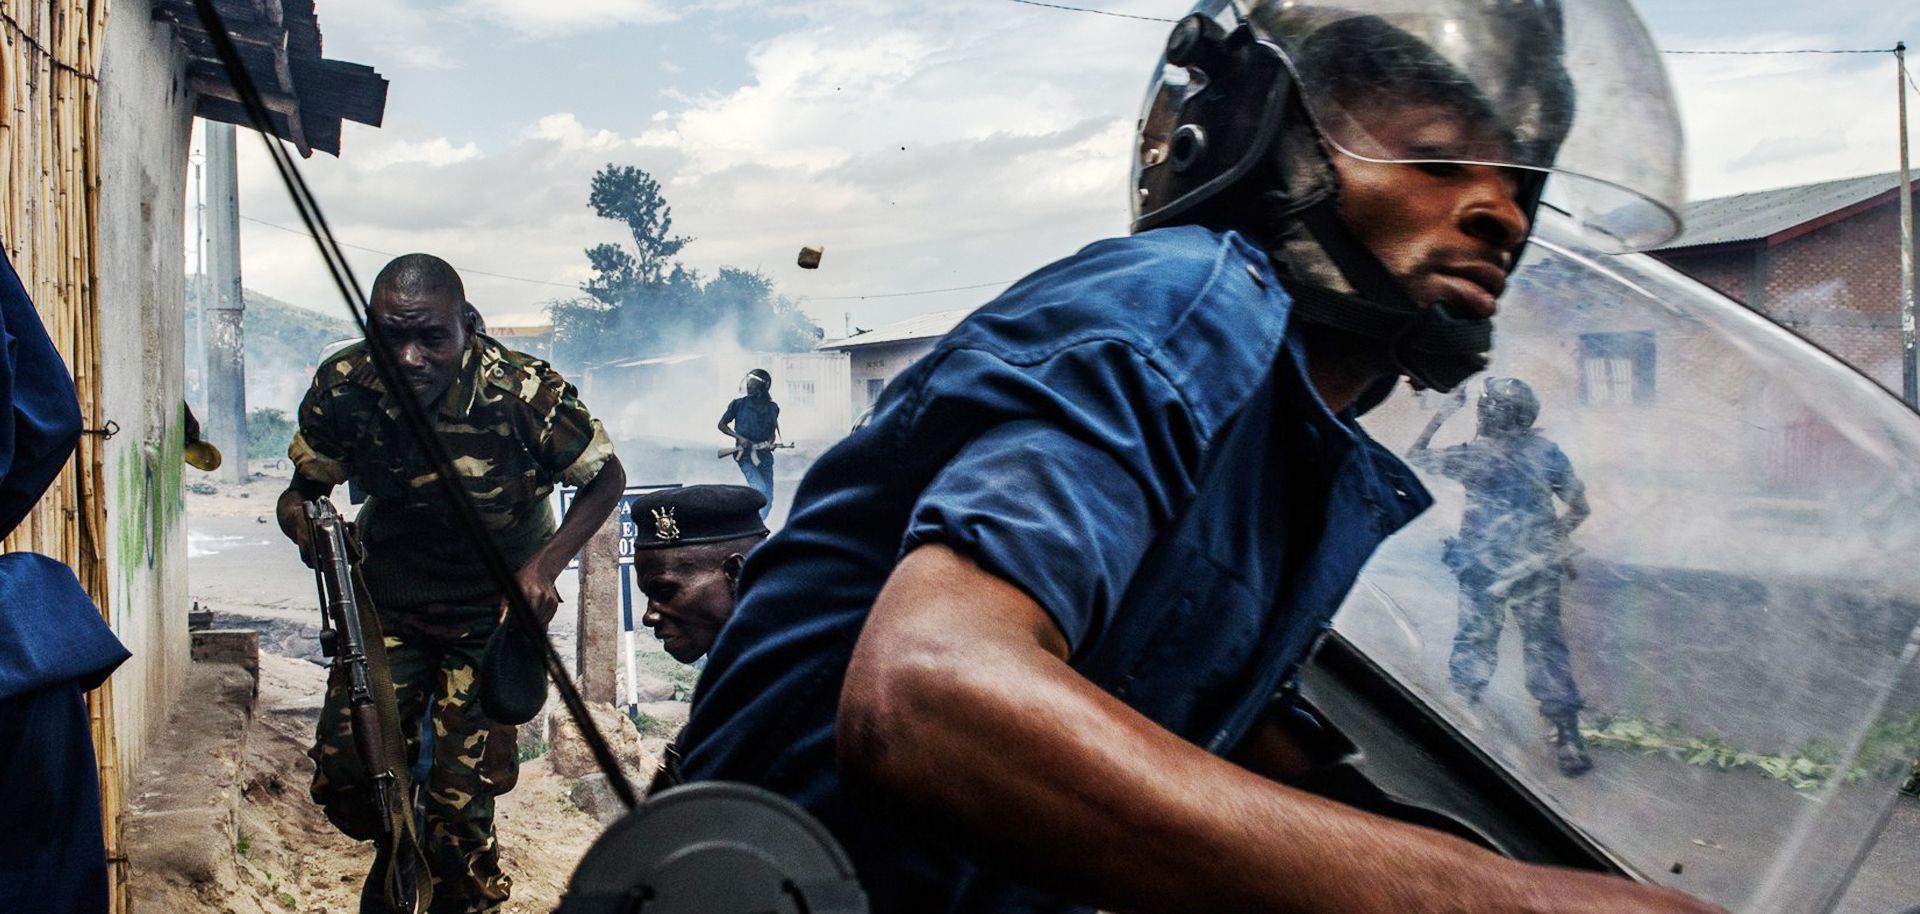 Burundi's Attempted Coup Offers Lessons